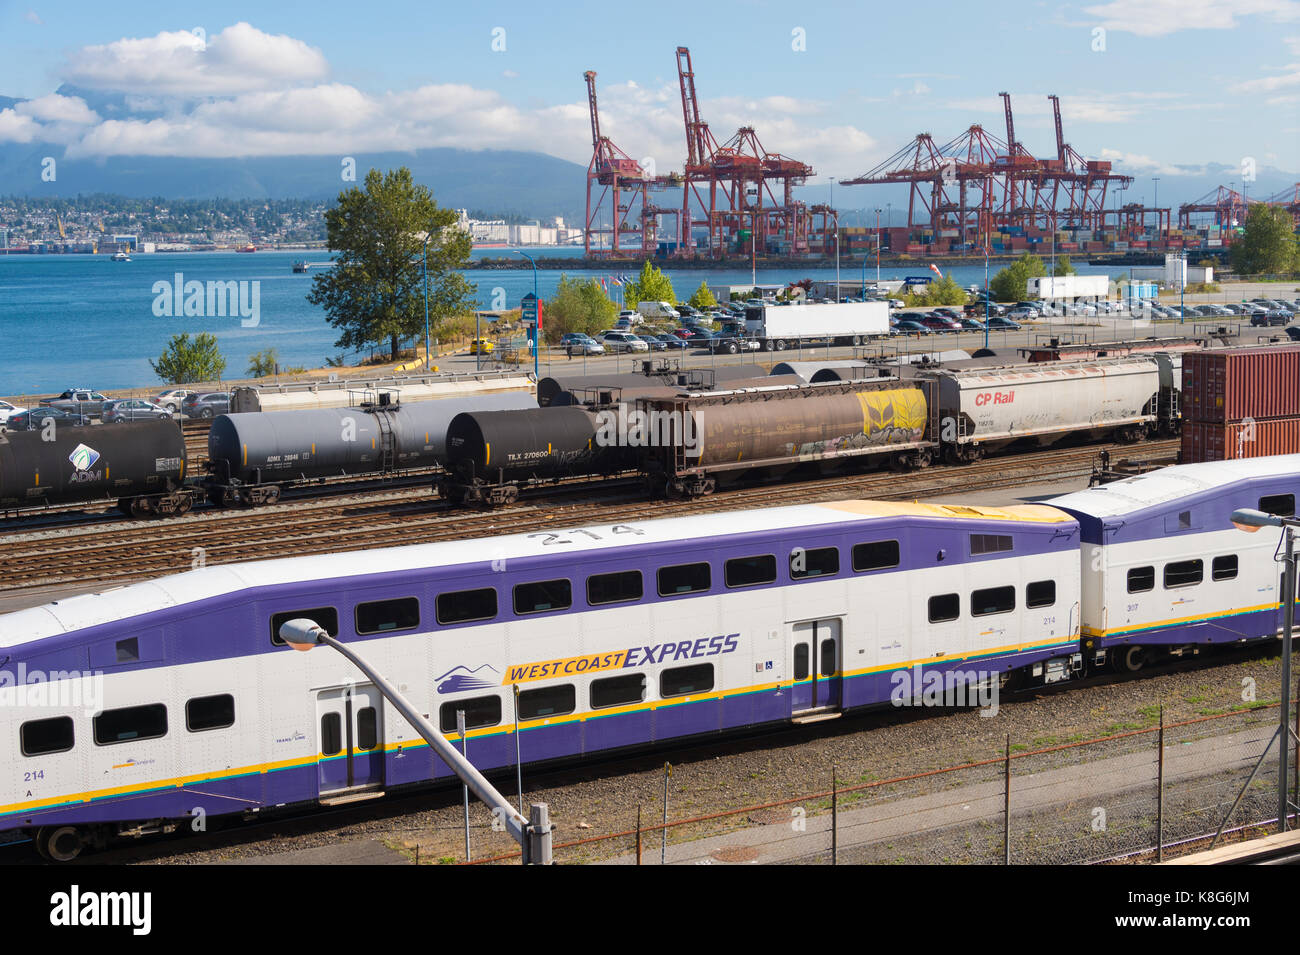 Vancouver, British Columbia, Canada - 13 September 2017: West Coast Express train near Waterfront station Stock Photo